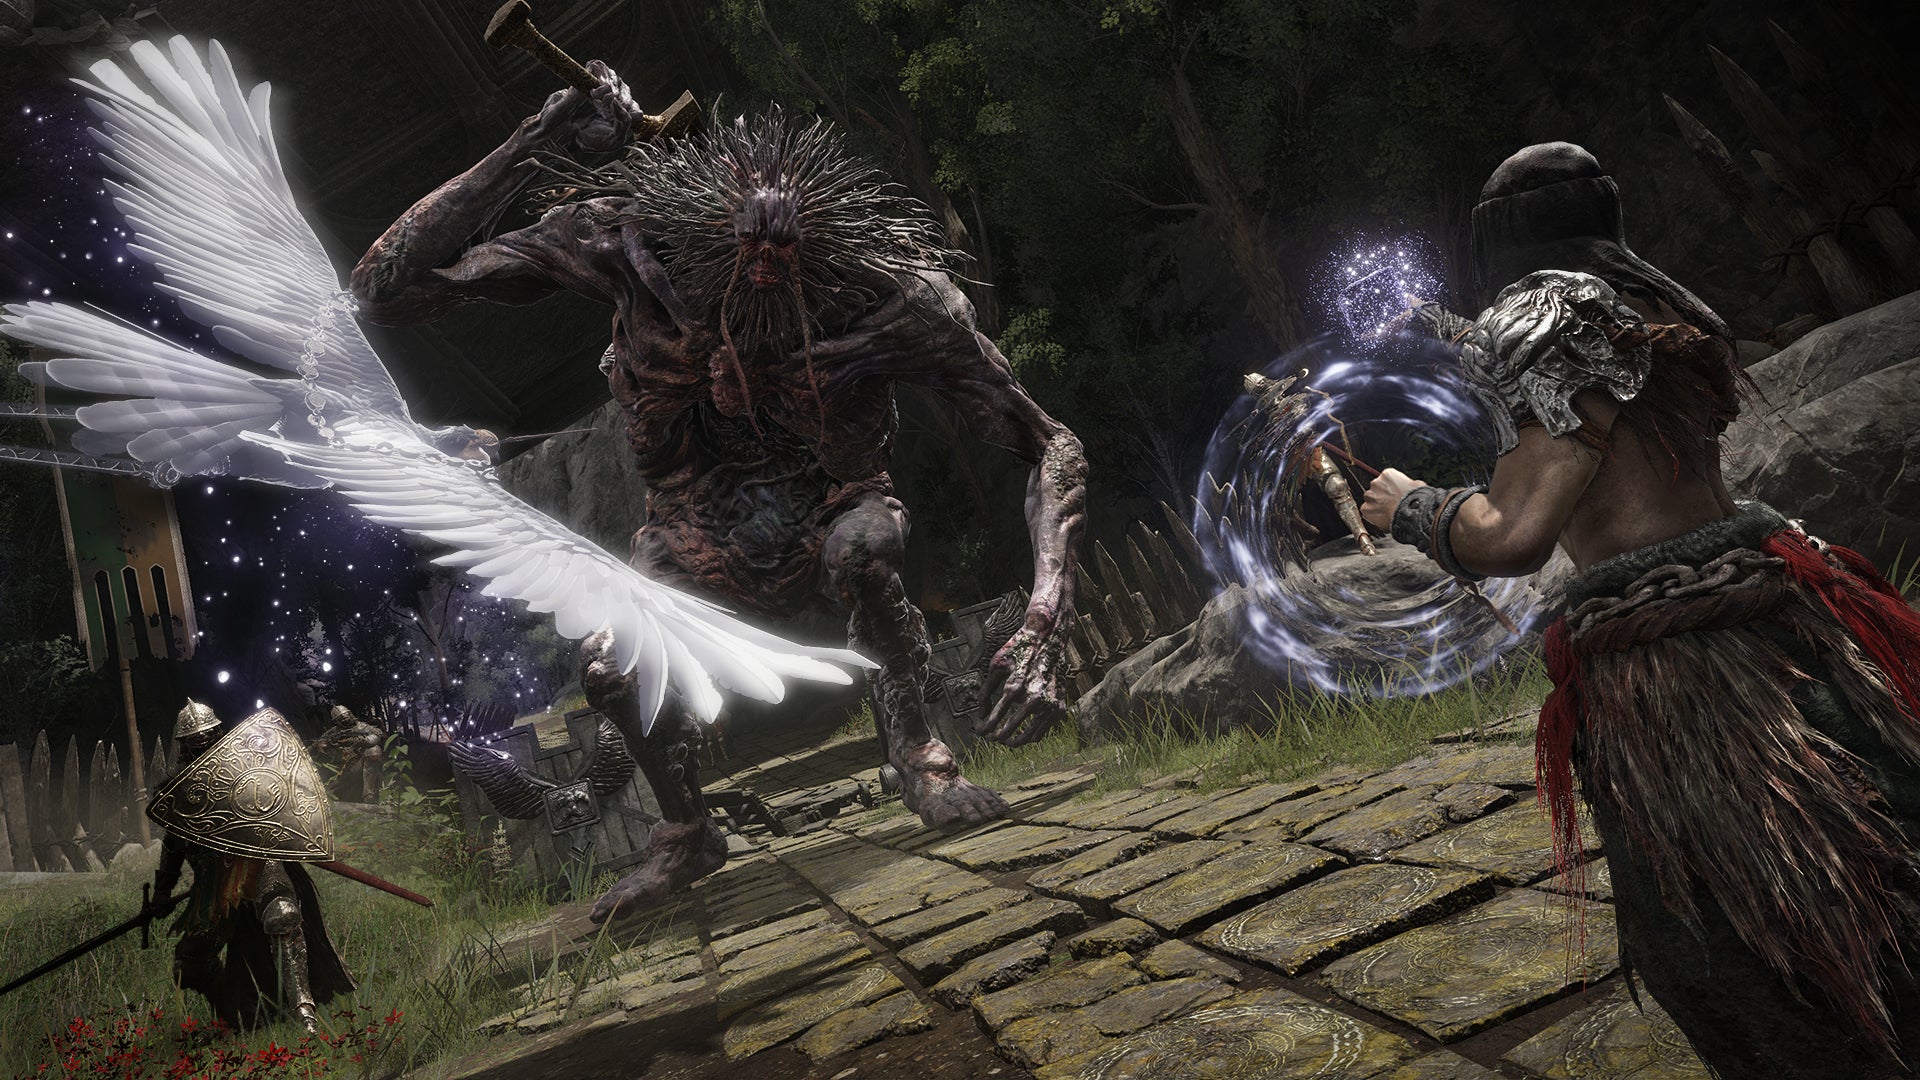 Summoning a bird with magic in a fight against a withered giant in an Elden Ring screenshot.